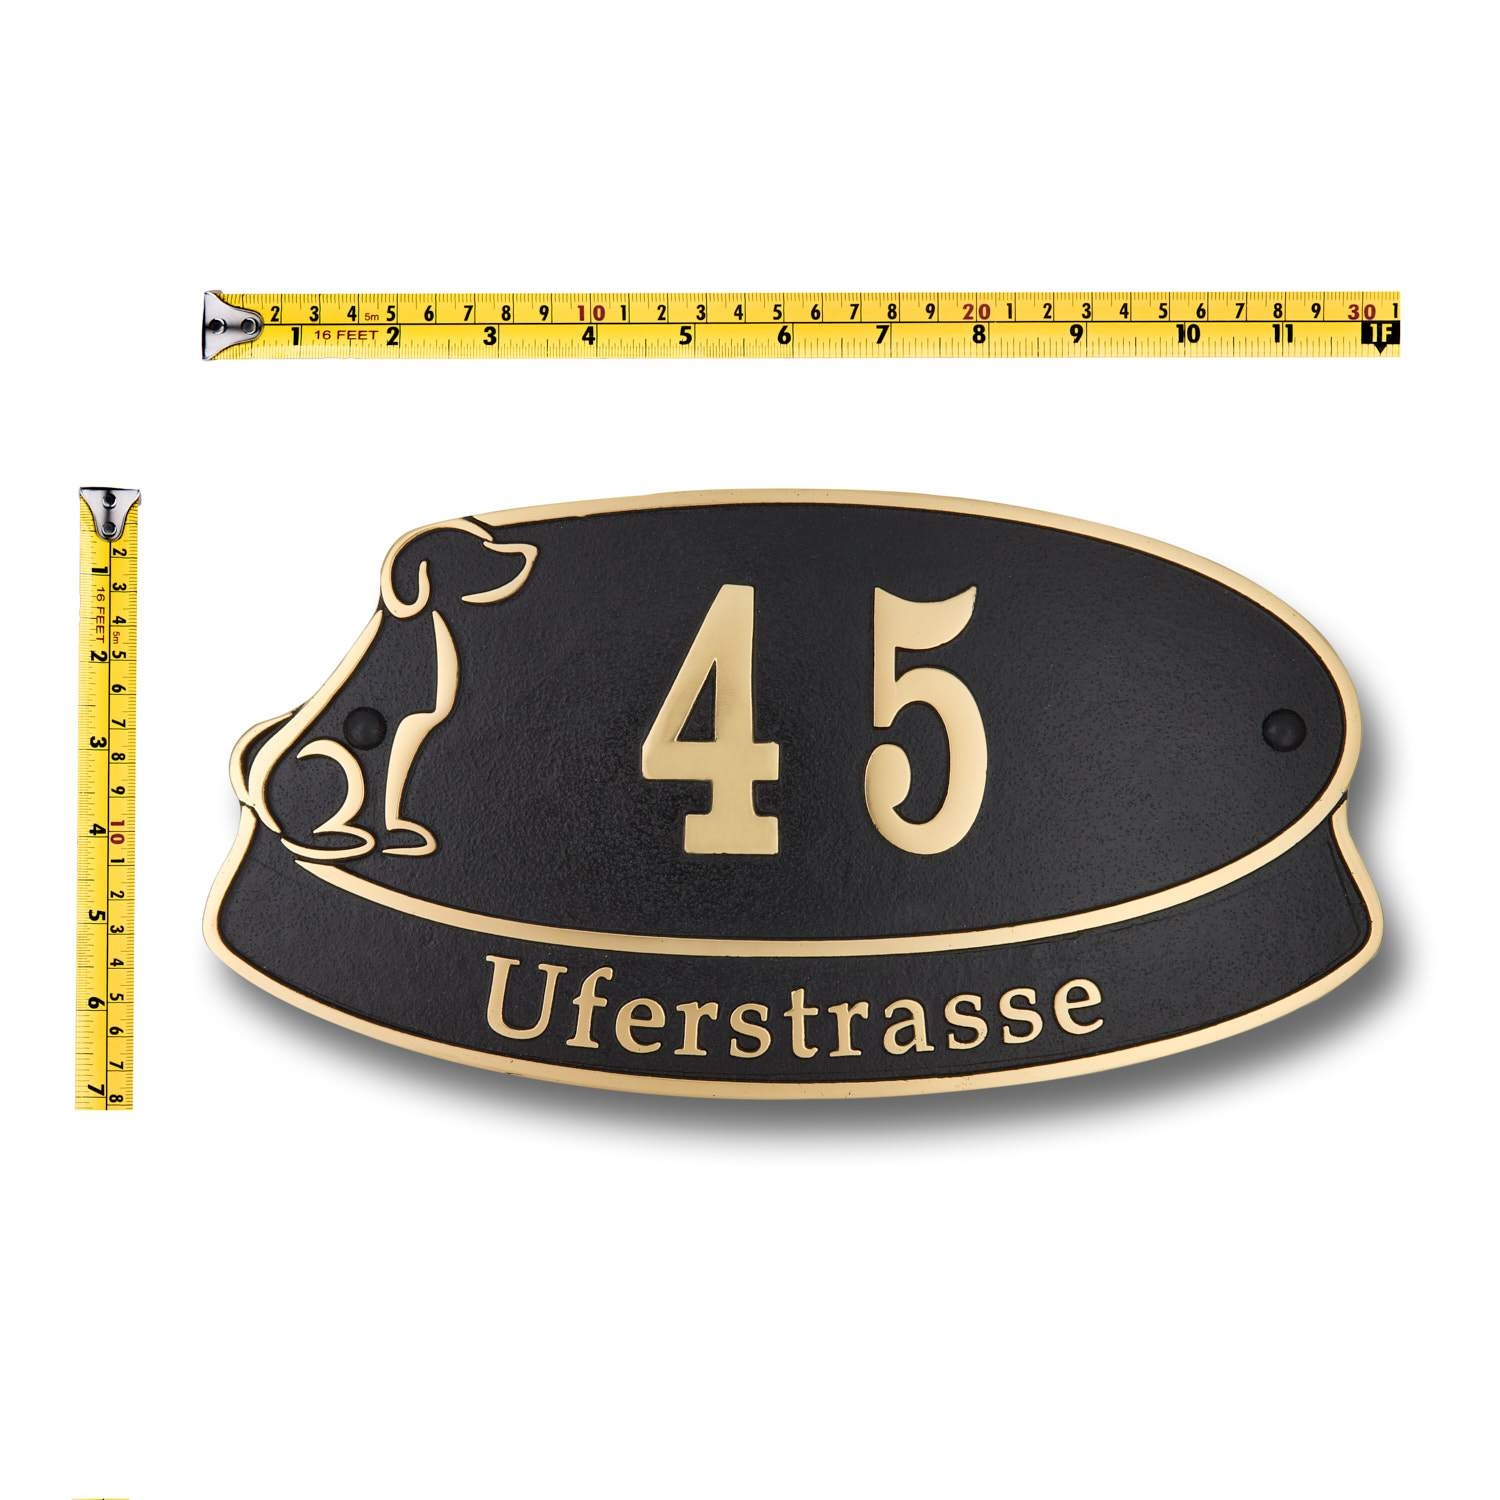 House Number Sign For Dog Lovers.  Cast Metal Personalised Home Or Mailbox Plaque – Large Up To 5 Characters With Street/Family Name